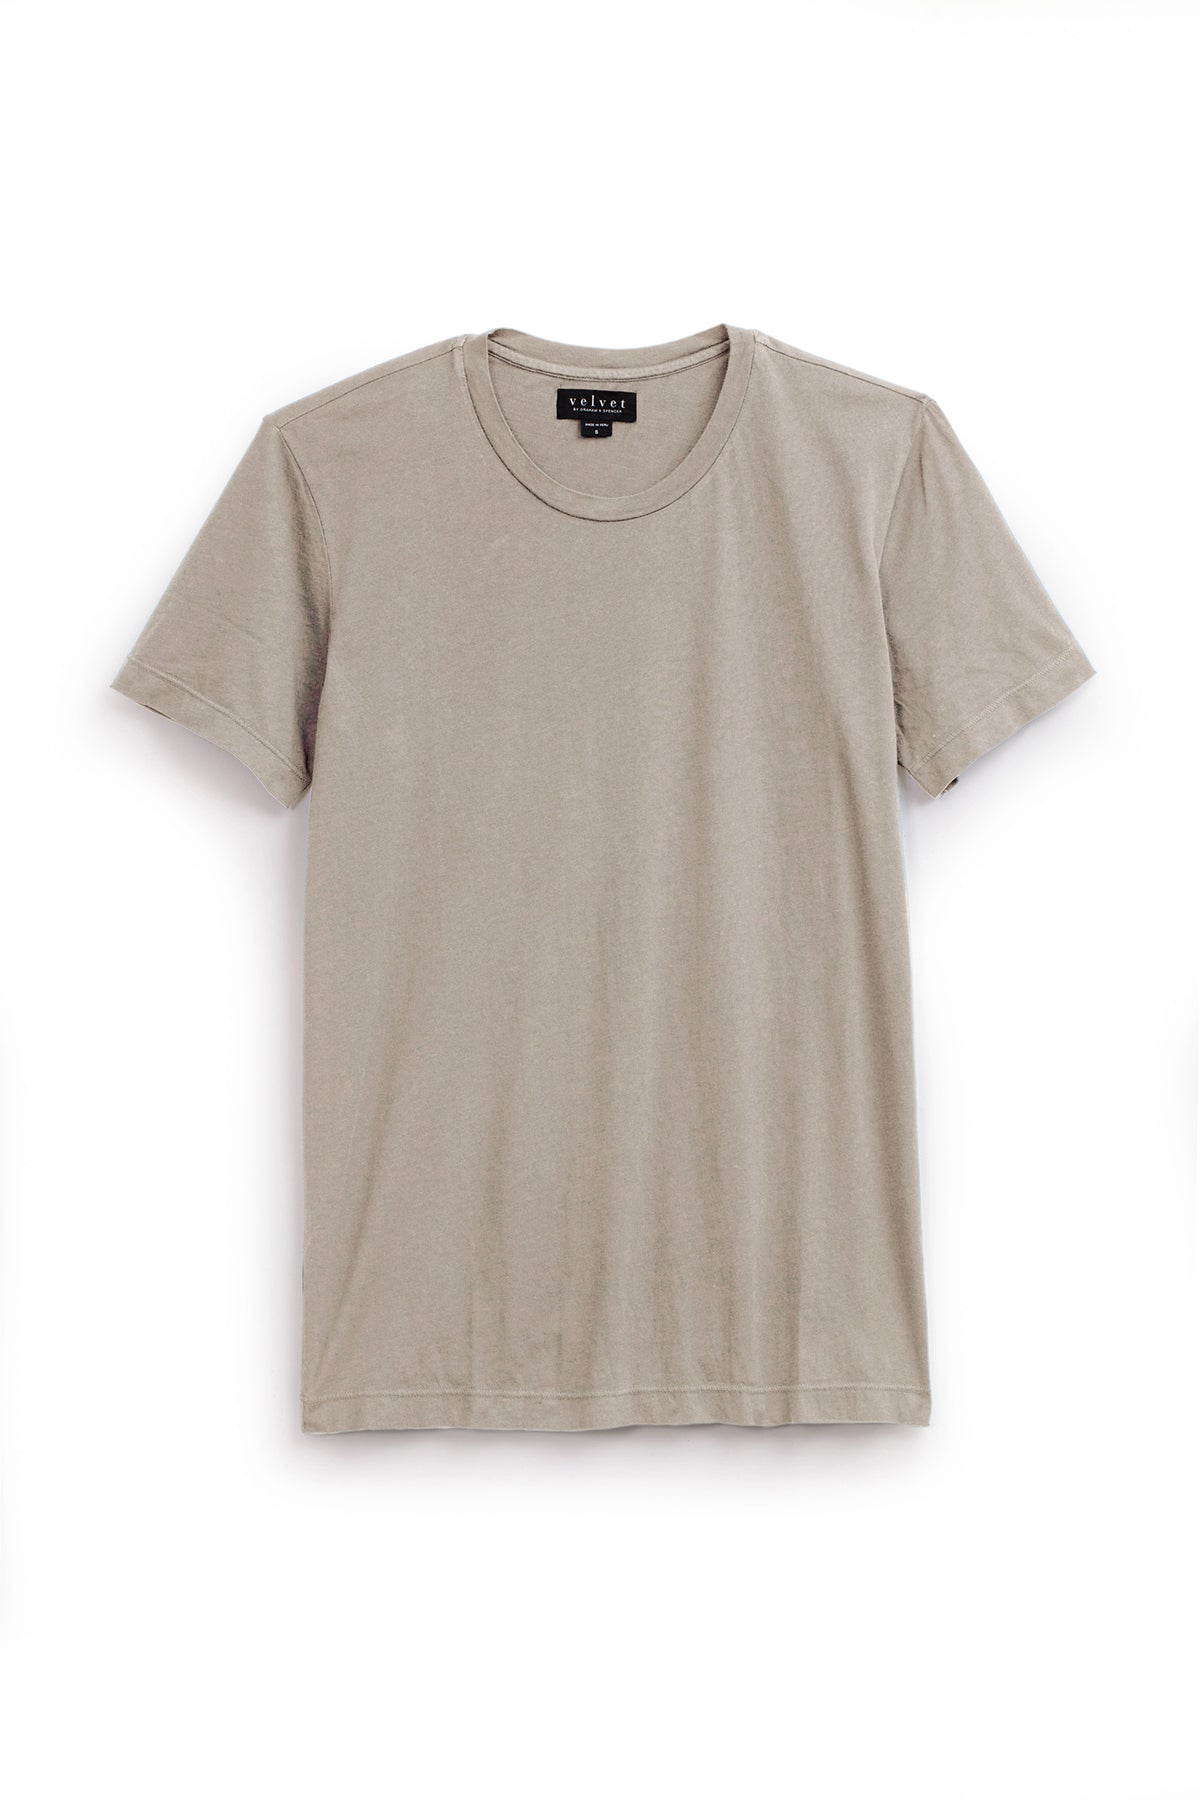   A Velvet by Graham & Spencer HOWARD WHISPER CLASSIC CREW NECK TEE with a vintage-feel softness on a white background. 